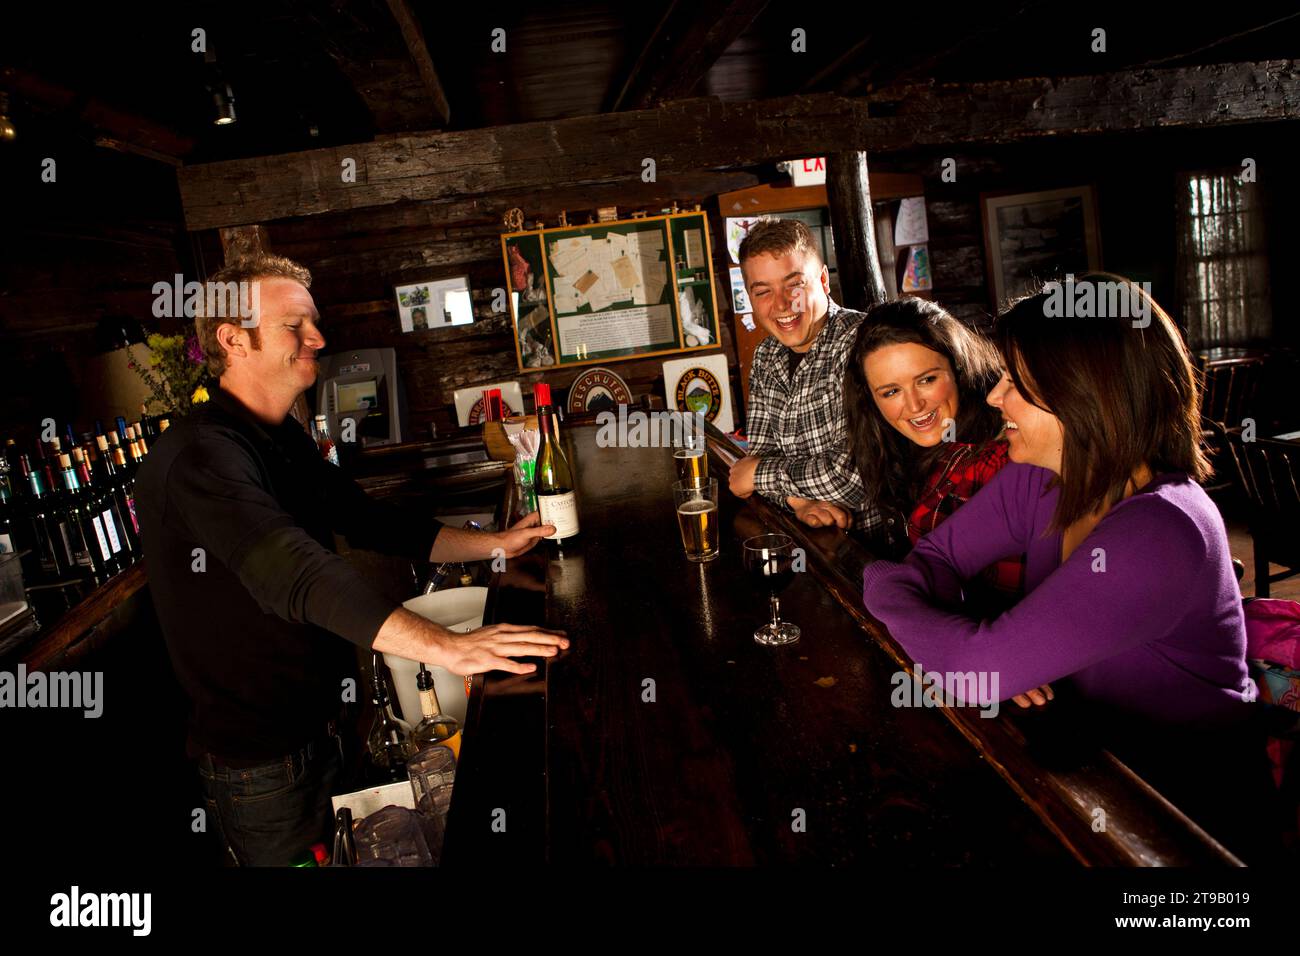 Two men and two women having beer and wine in an old lodge. Stock Photo